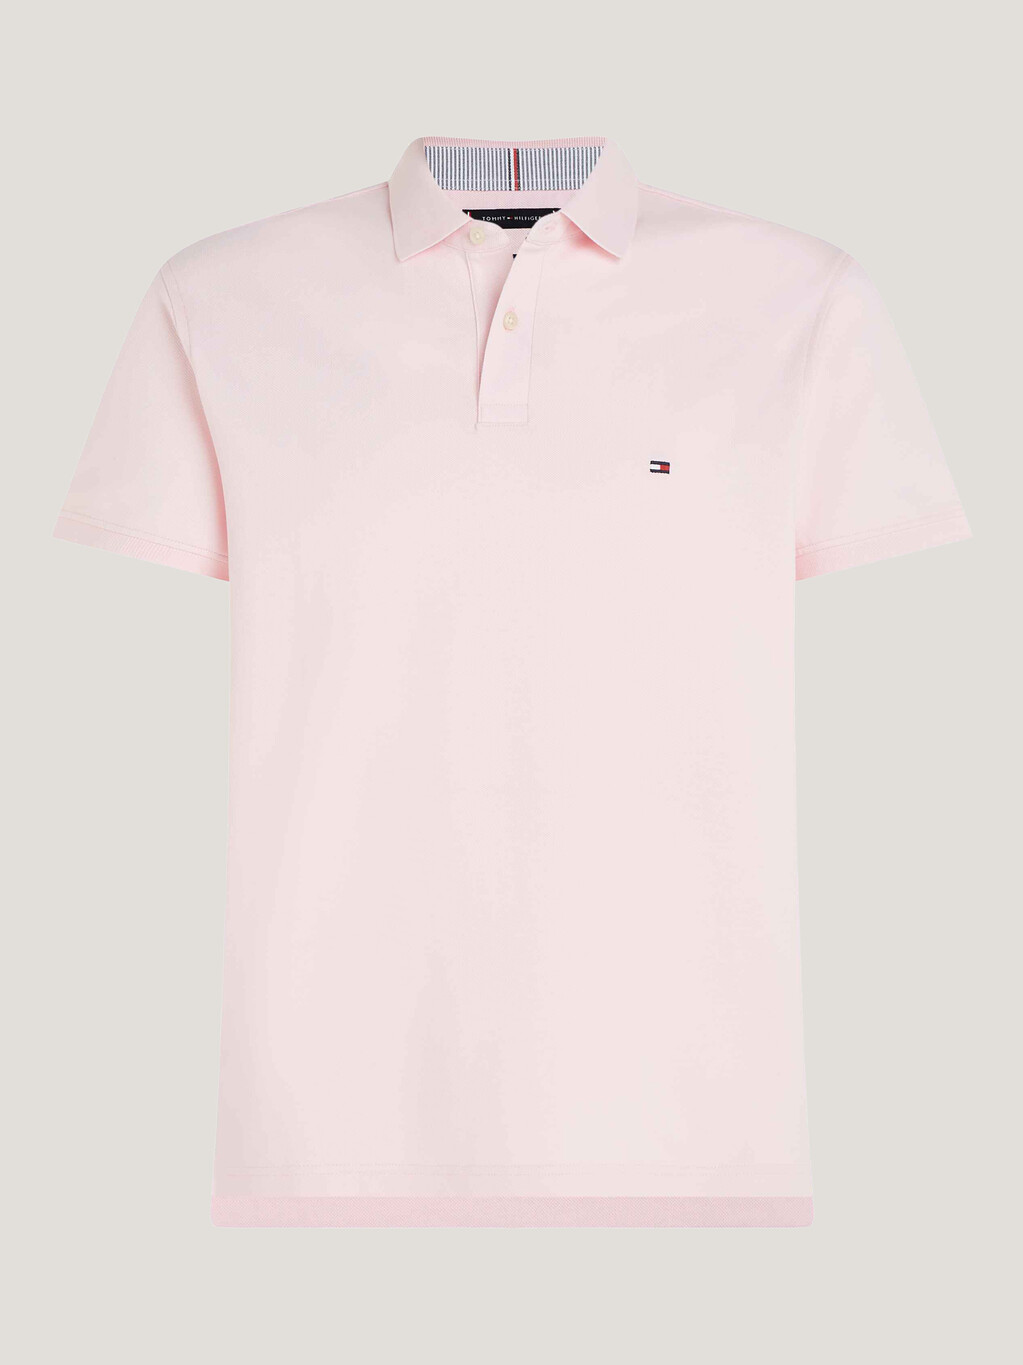 1985 Collection Slim Fit Polo, Light Pink, hi-res